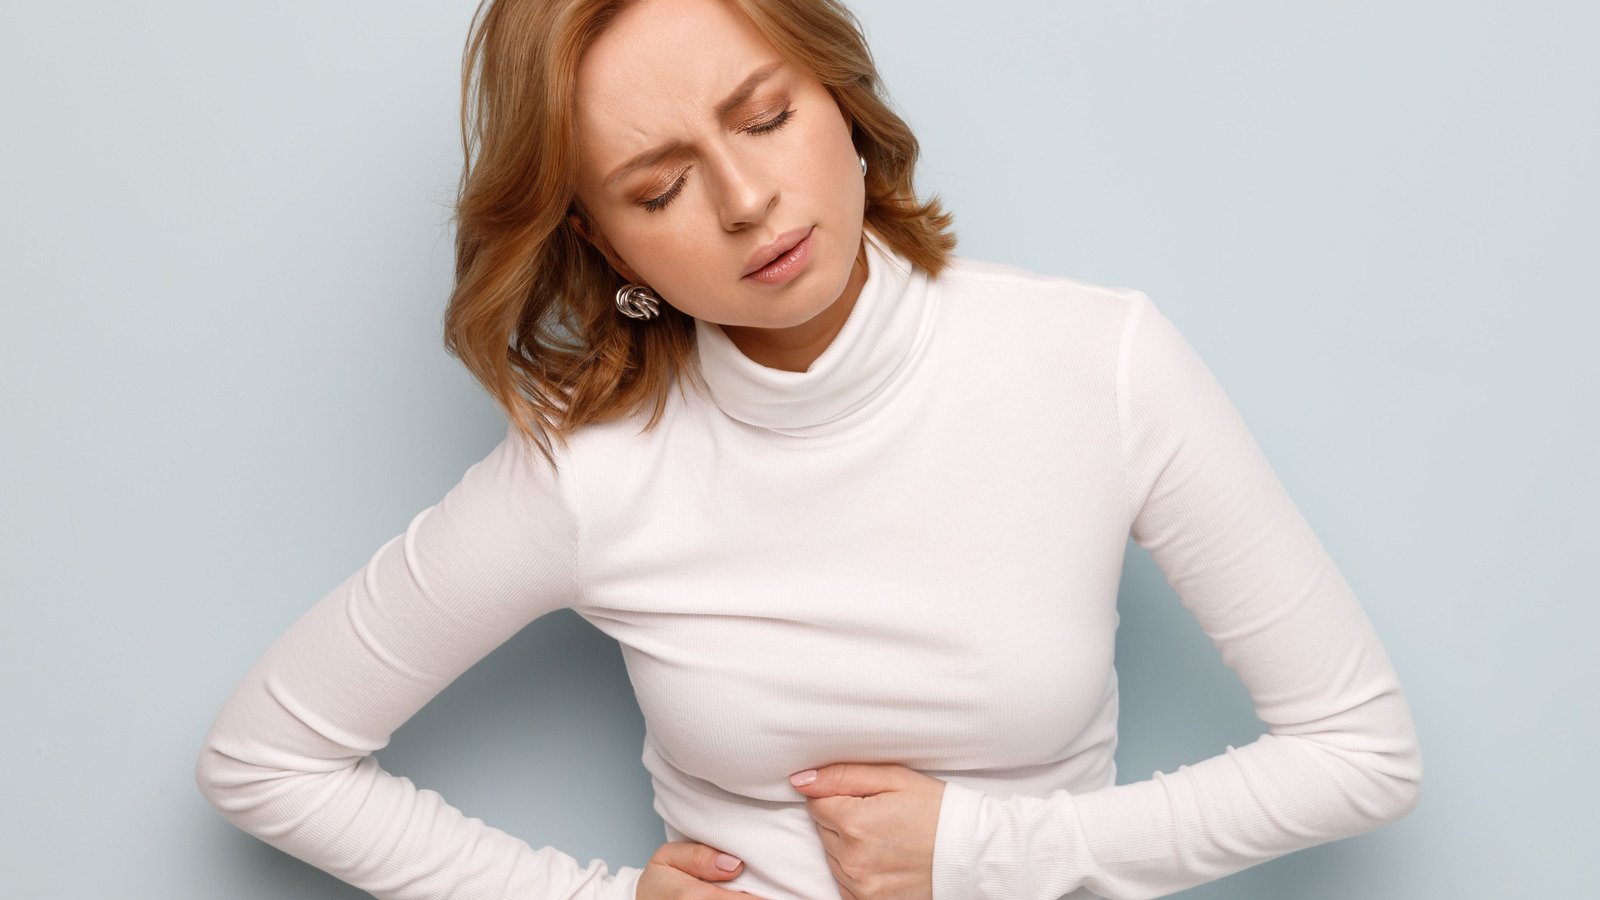 The Colon Disease That You May Develop From Constipation